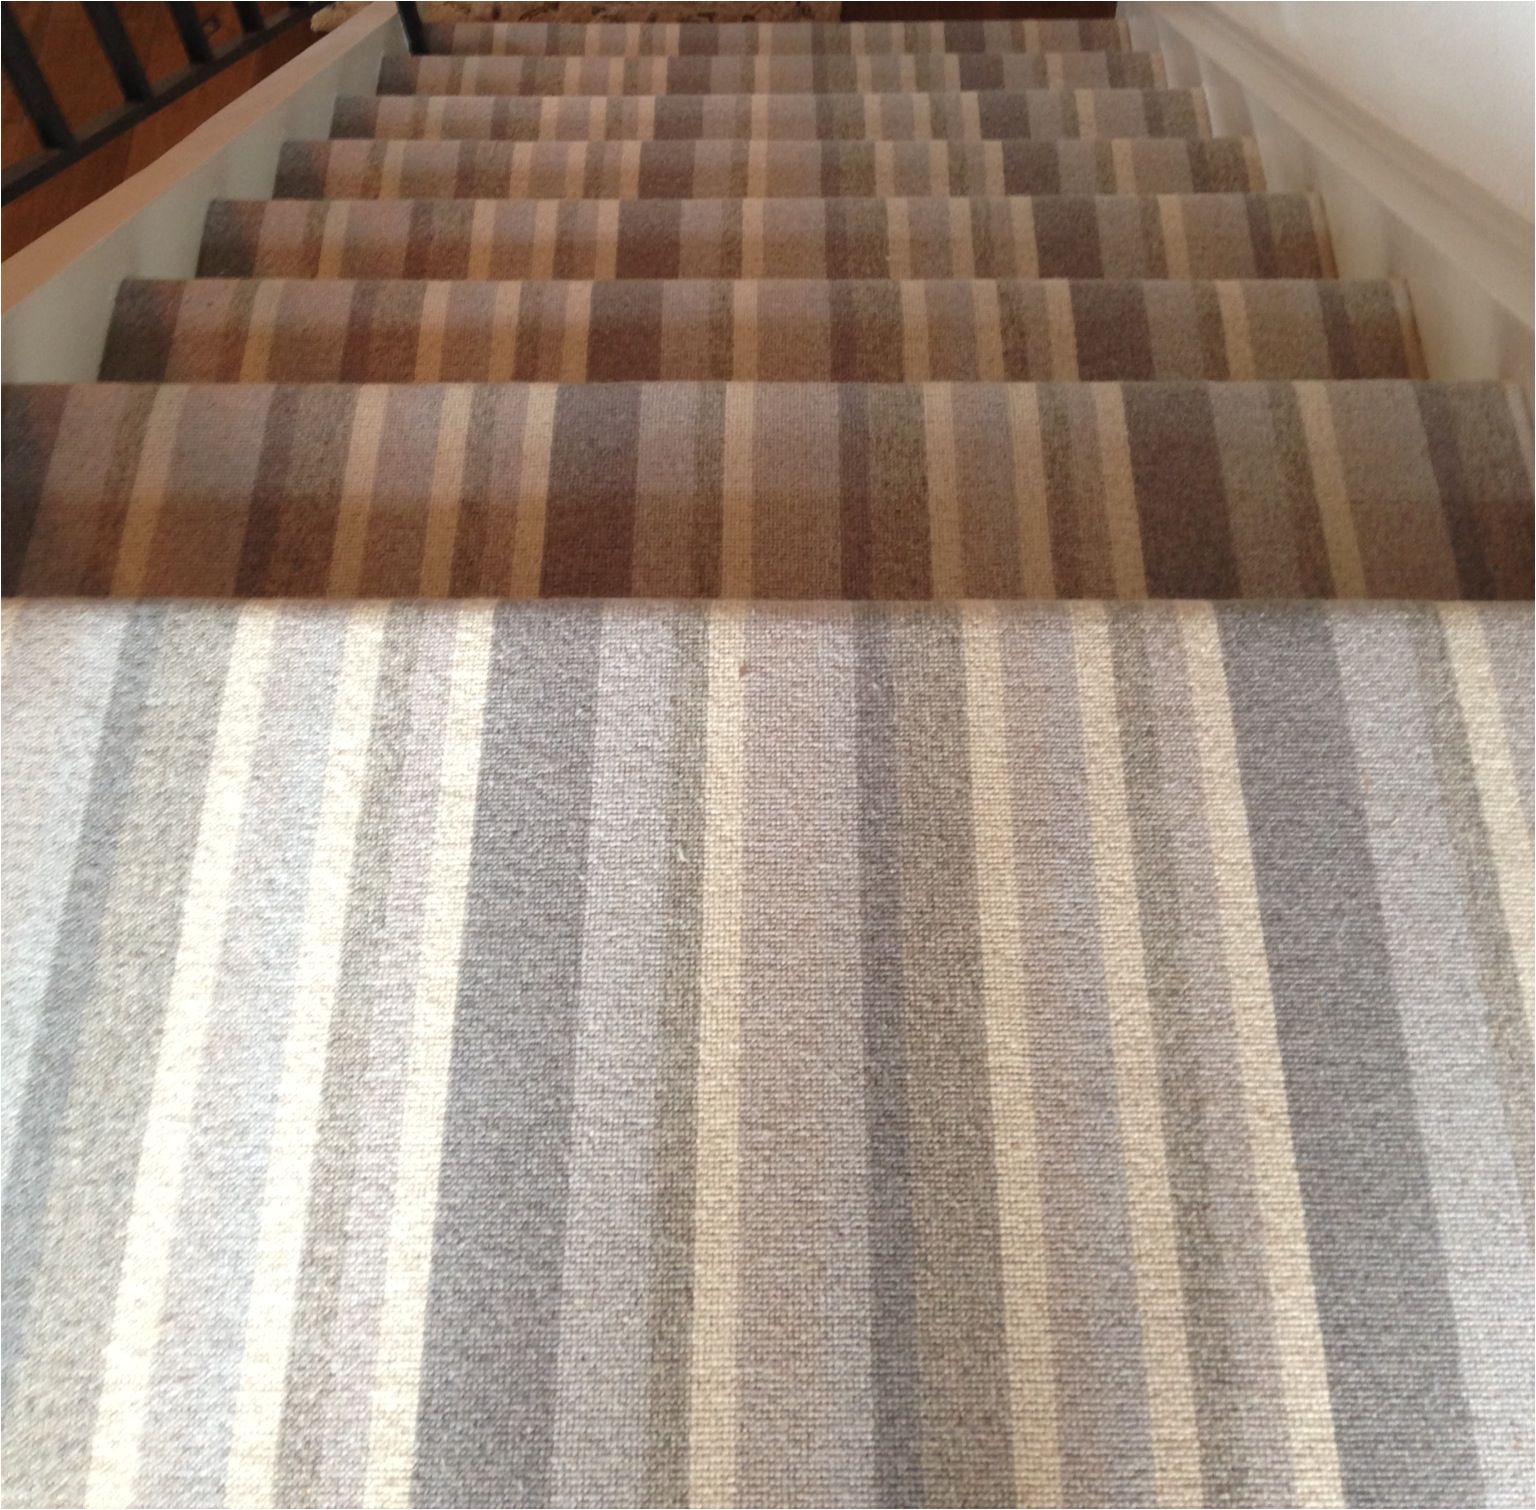 Black and White Striped Runner Rug Make A Boring Staircase Come to Life with Stripe Carpet This is A